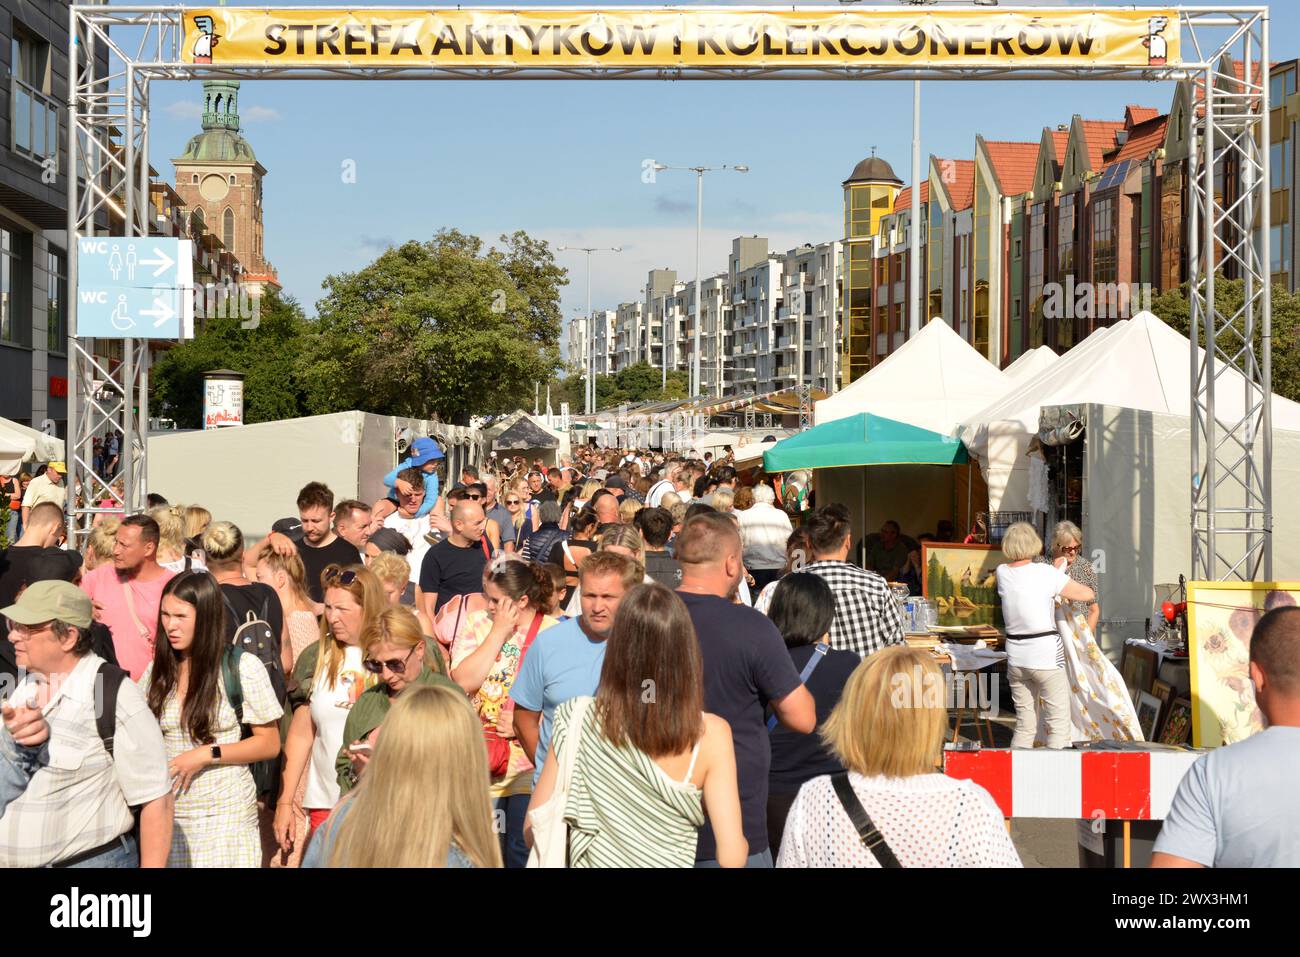 Antiques market bazaar marketplace busy with crowds of people in Dlugi Ogrodi Street during the annual St. Dominic's Fair Gdansk Poland, Europe, EU Stock Photo